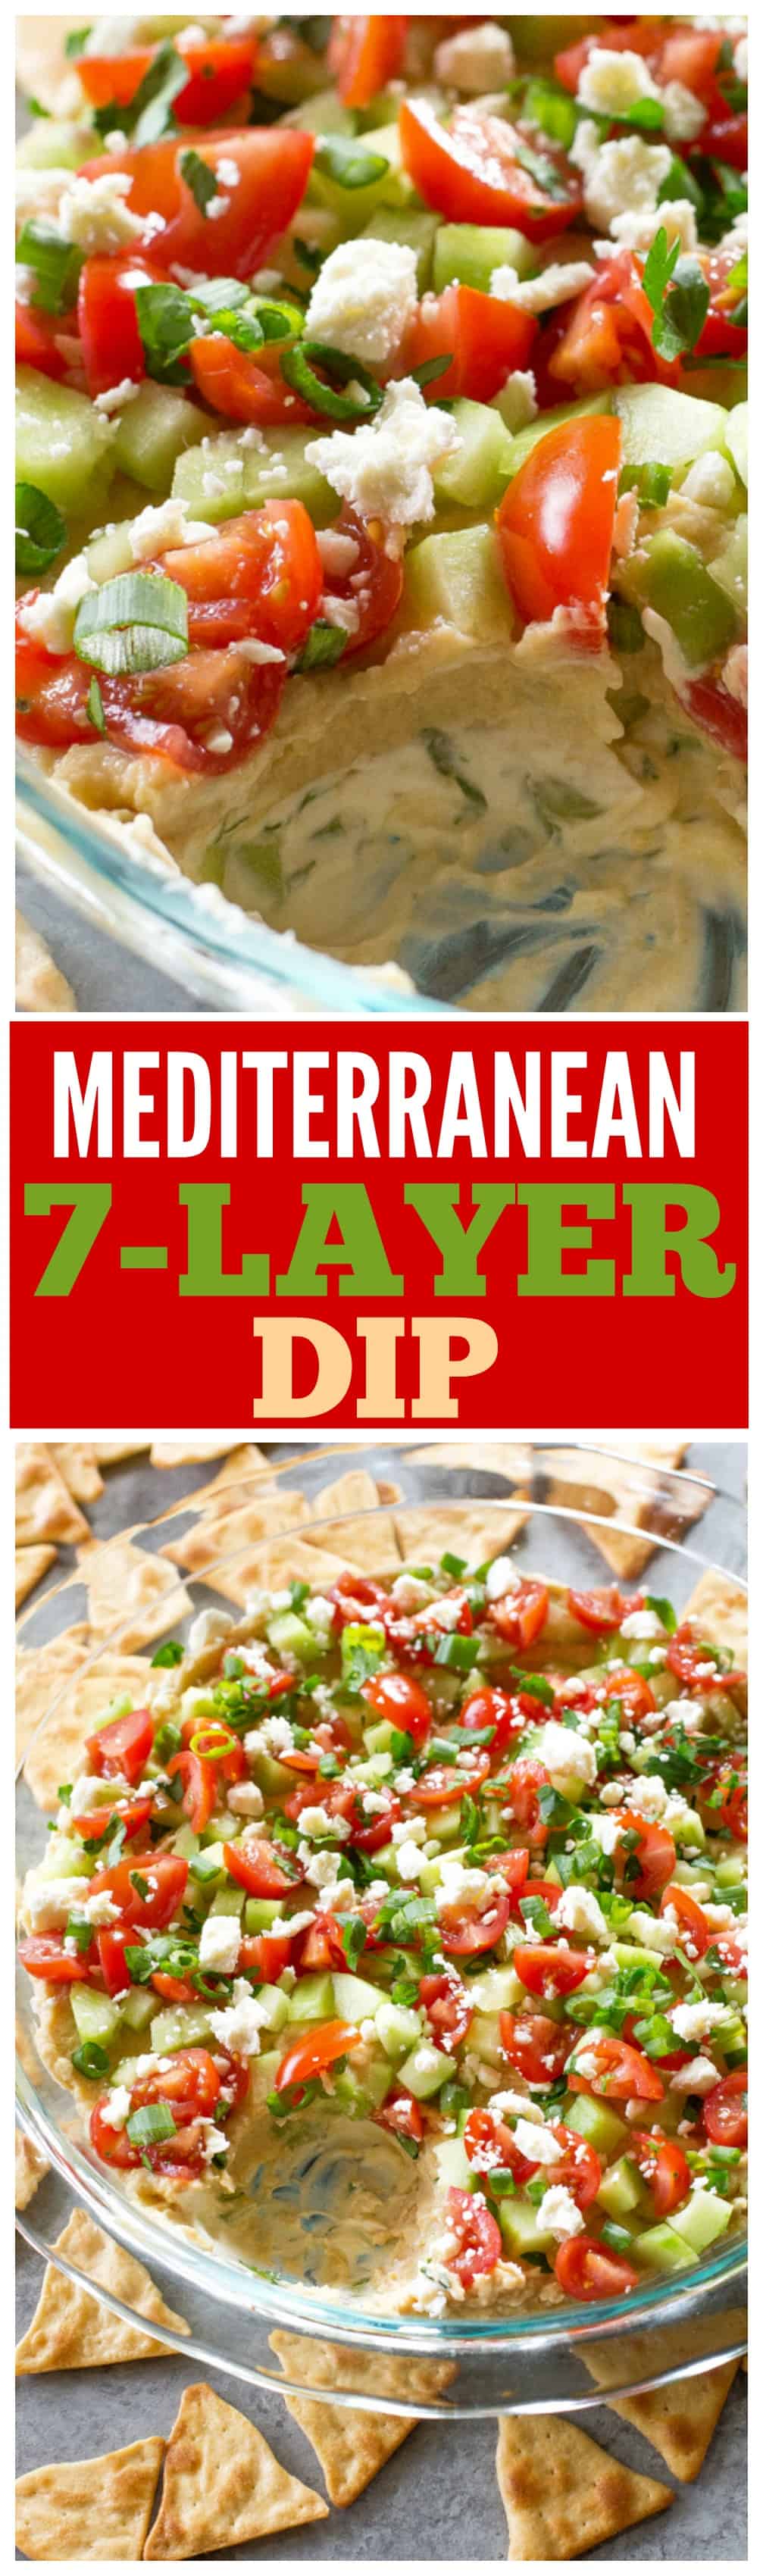 This Mediterranean 7-Layer Dip has layers of homemade tzatziki, hummus, cucumber, tomatoes, green onions, and feta. Serve this appetizer recipe with pita chips! the-girl-who-ate-everything.com